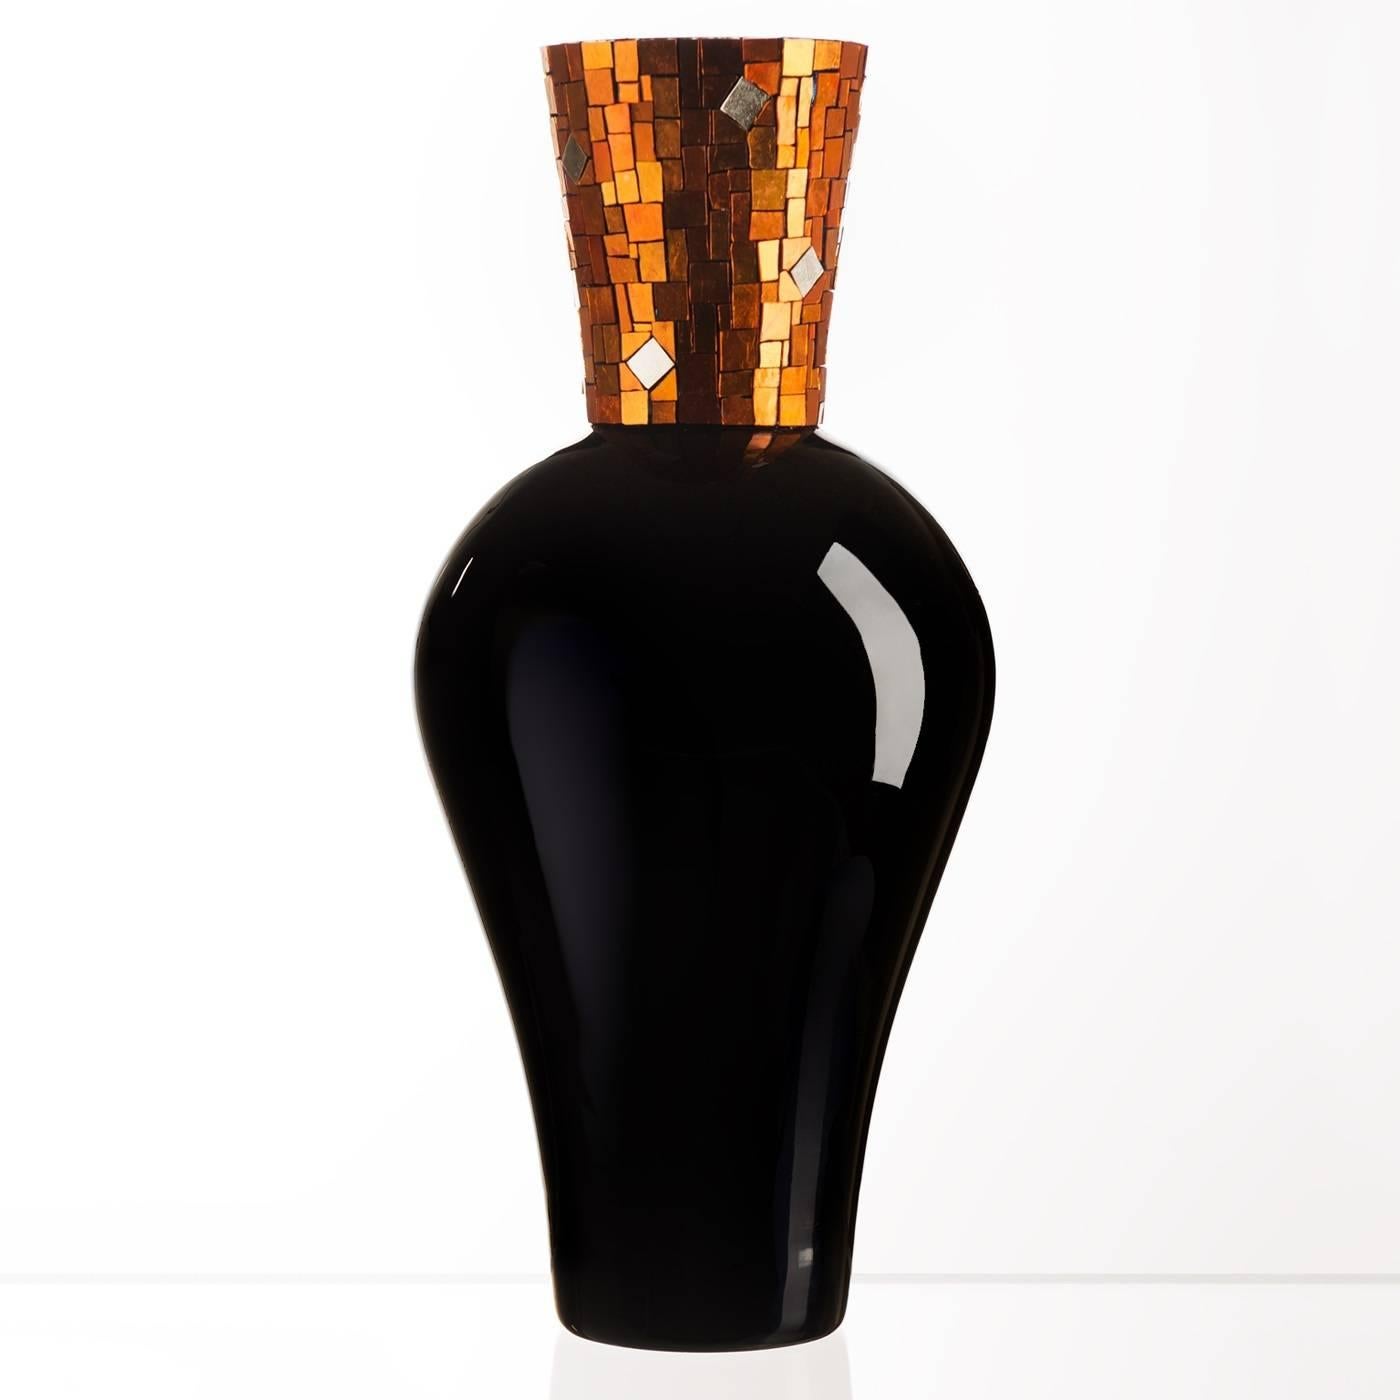 Like all the pieces of the design collection, this captivating vase displays extraordinary craftsmanship. The luxurious mosaic accent that stands atop the black Murano mouth-blown glass is made of 24-karat gold foil and orange glass tesserae,